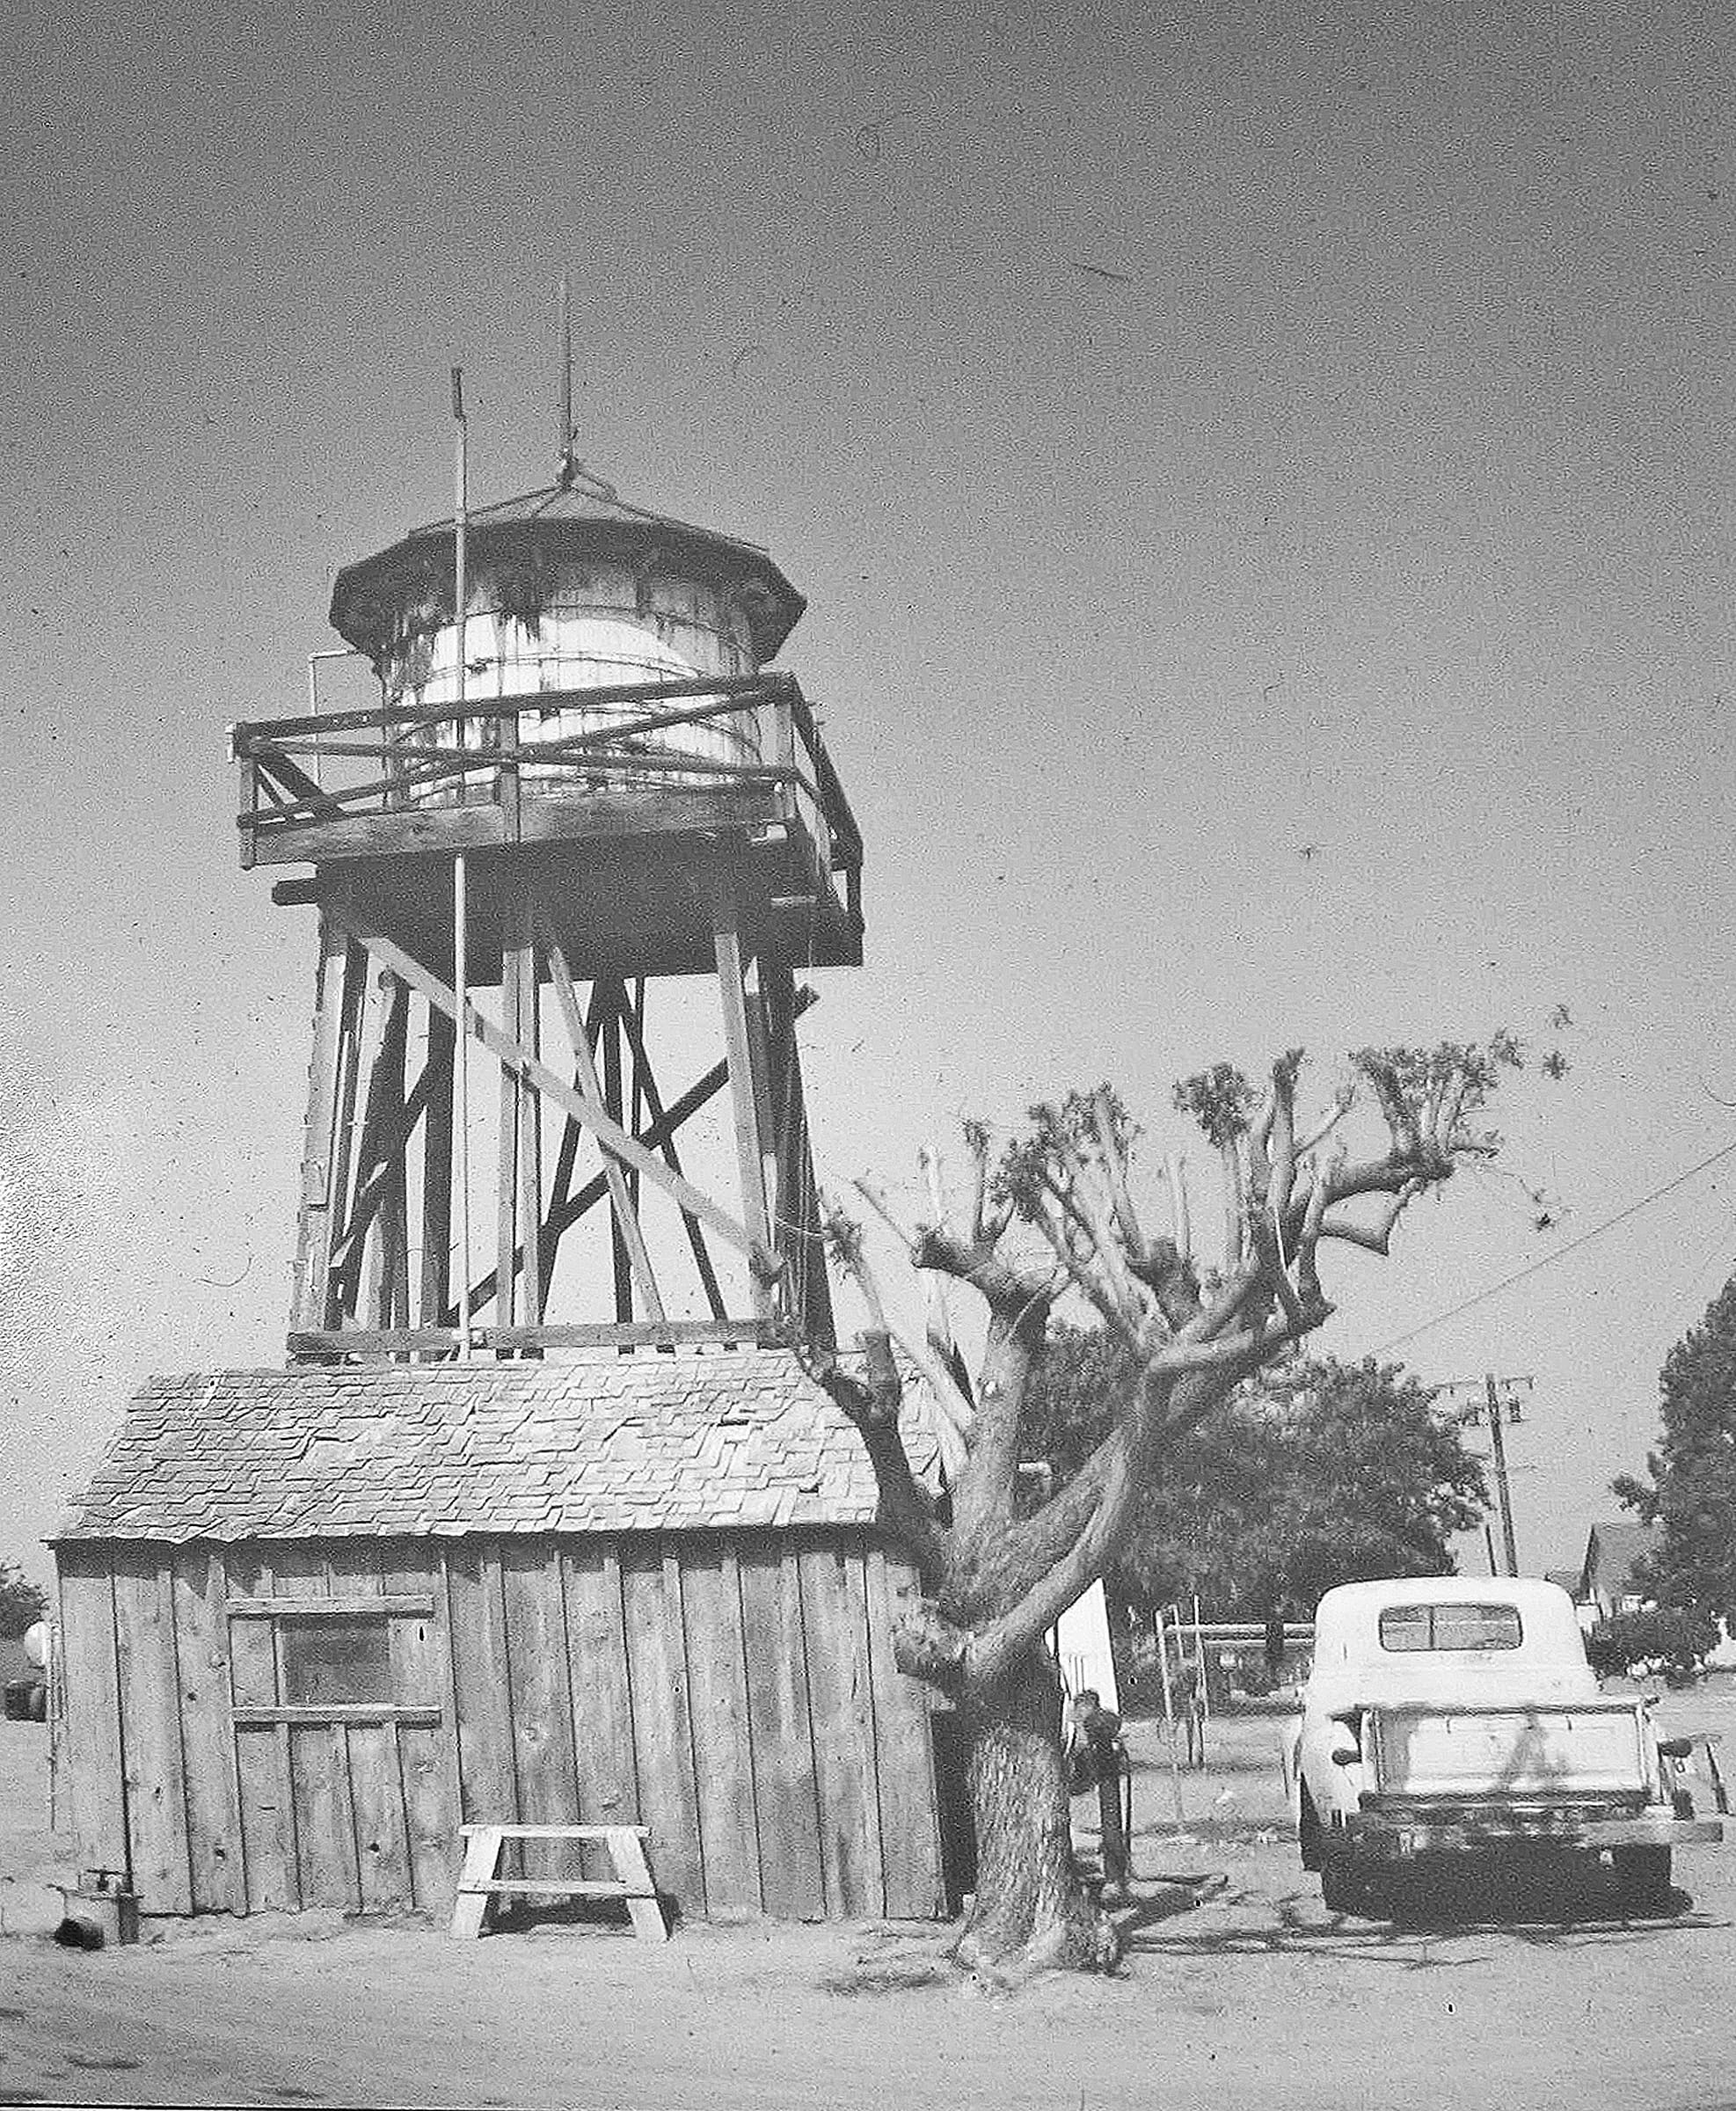 Black and white photo of an old wooden water tower above a small shack at Heritage Square, with a leafless tree and an old van parked nearby.